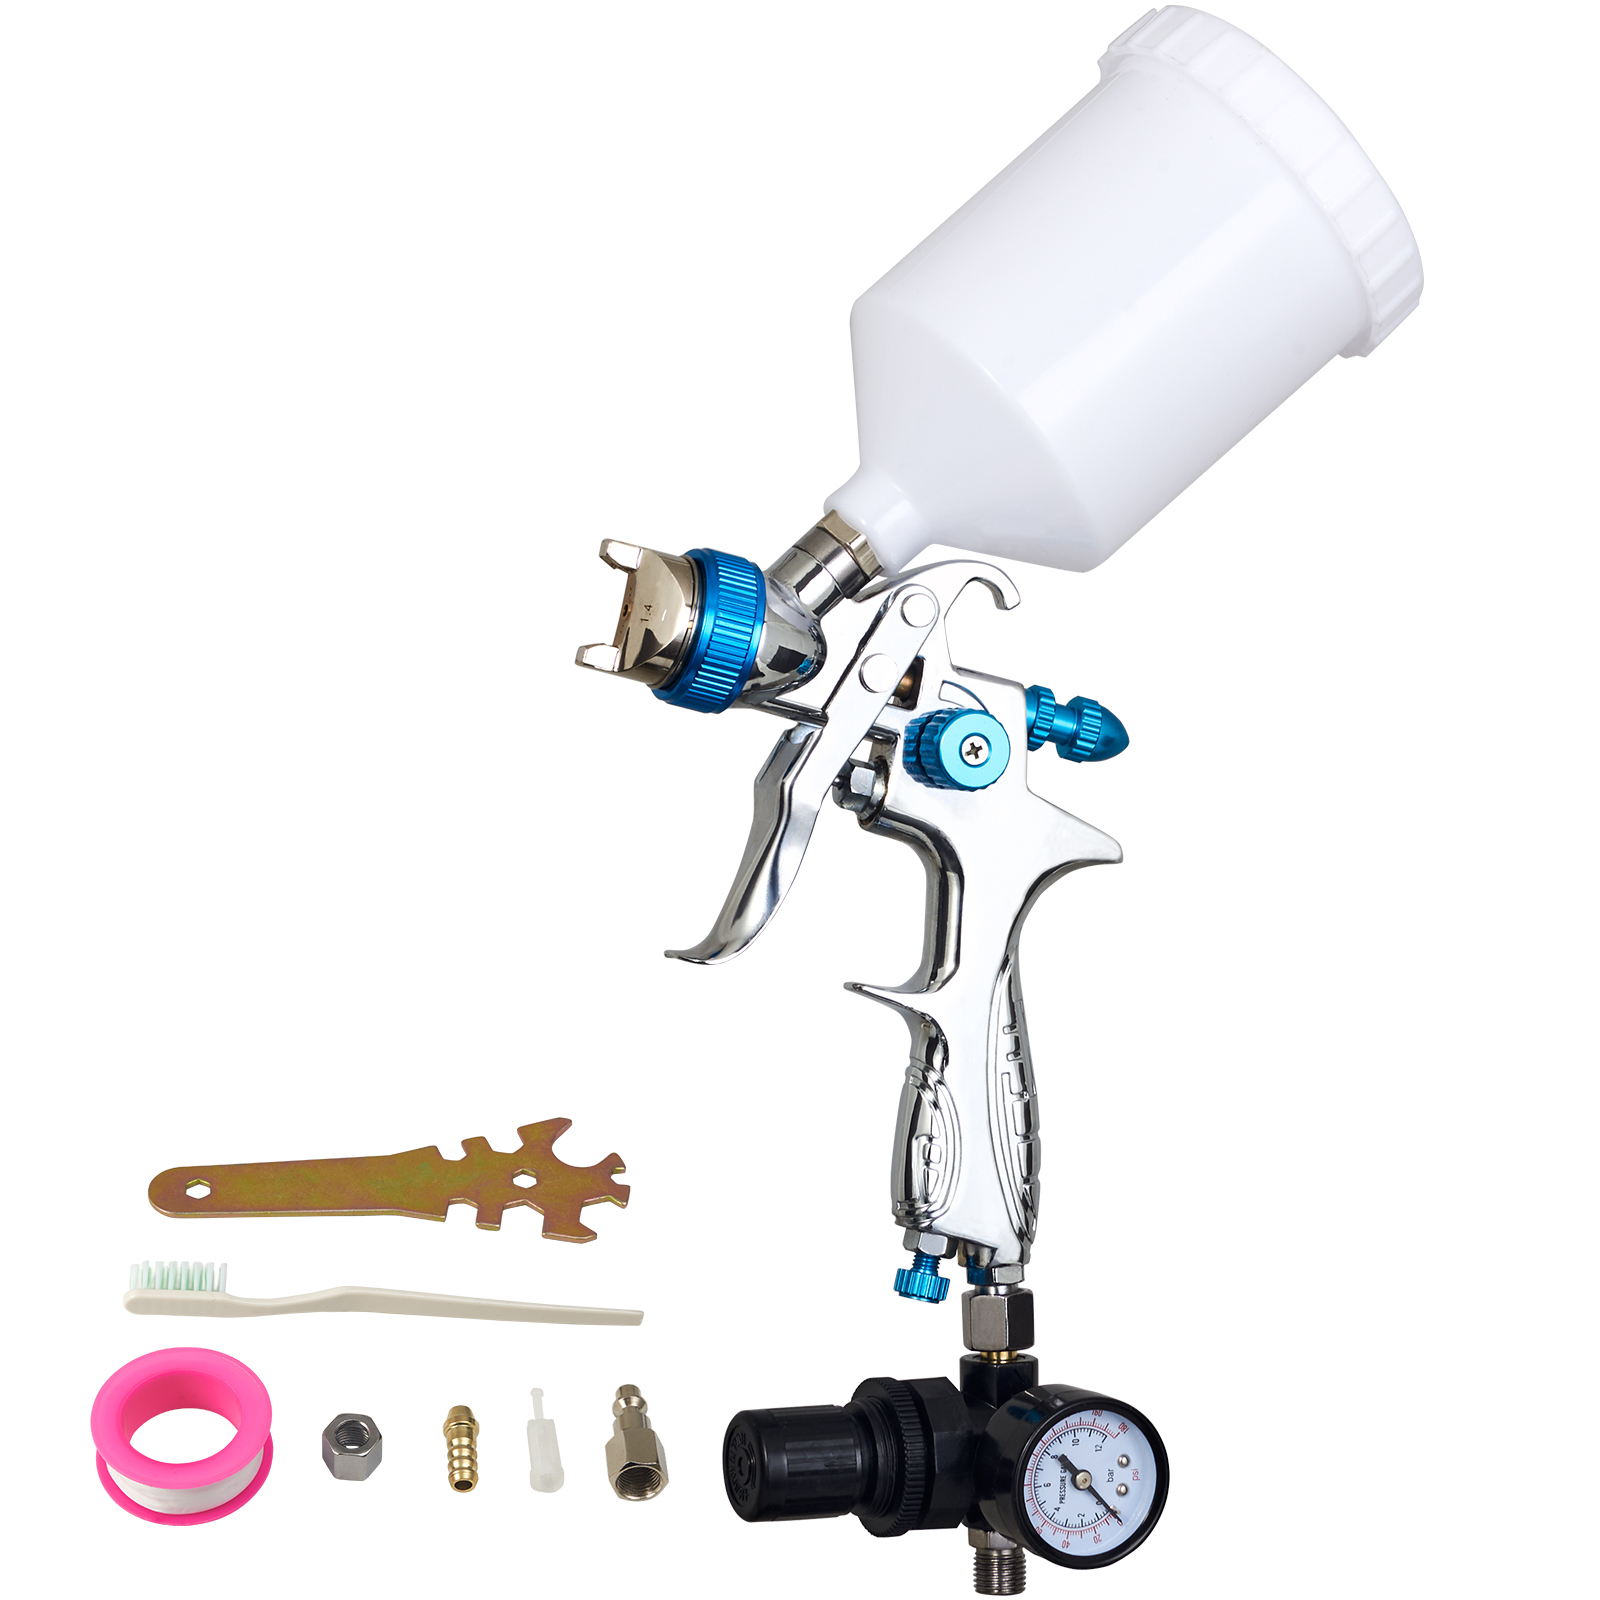 High Performance Mini 1.7mm Nozzle Paint Spray Gun for Painting Cars Tools Set